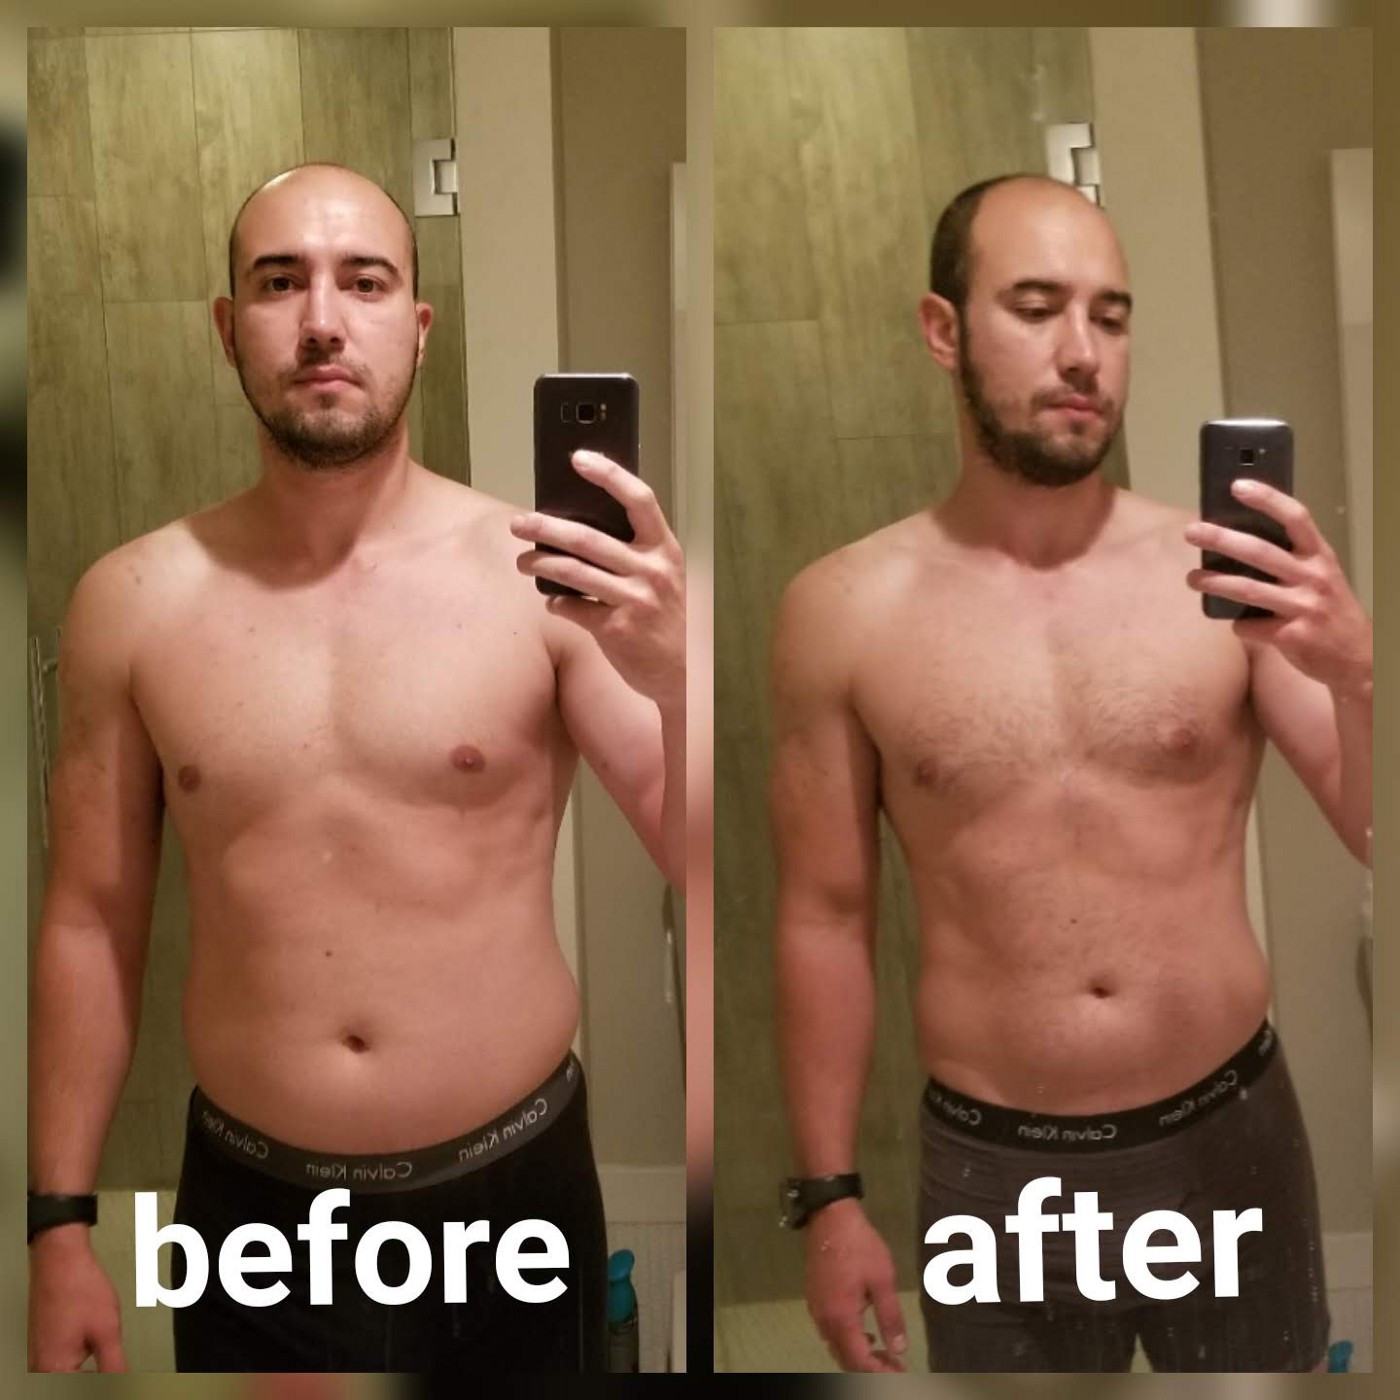 Keto Diet Results 4 Weeks
 I Tried the Ketogenic Diet for 4 Weeks Here is What Happened